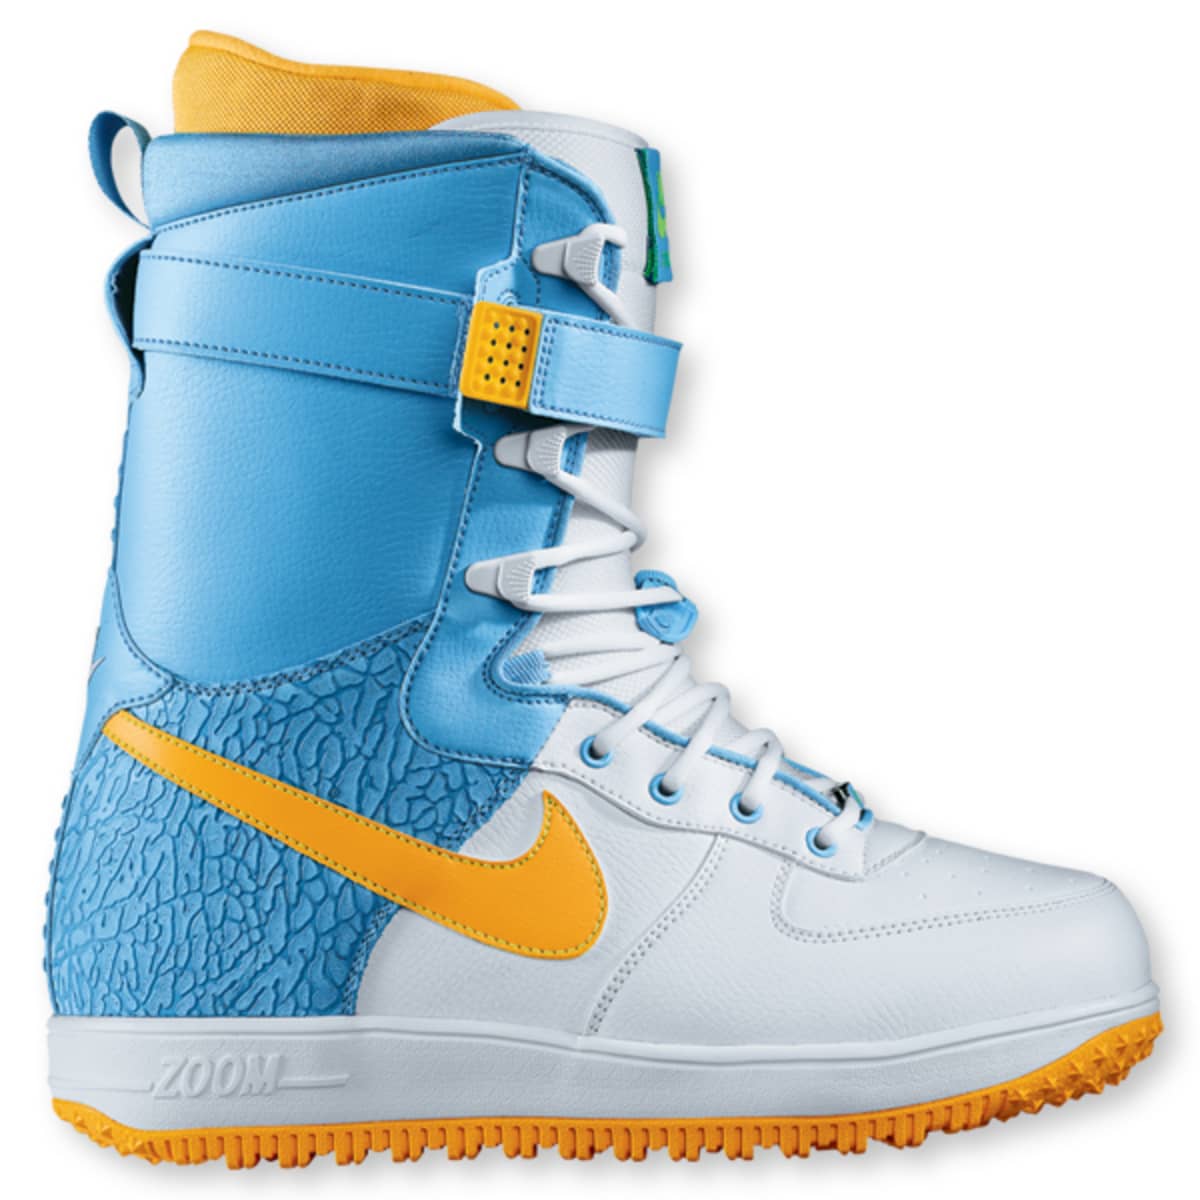 Nike Zoom Force 1 Snowboard Boot - Snowboarder